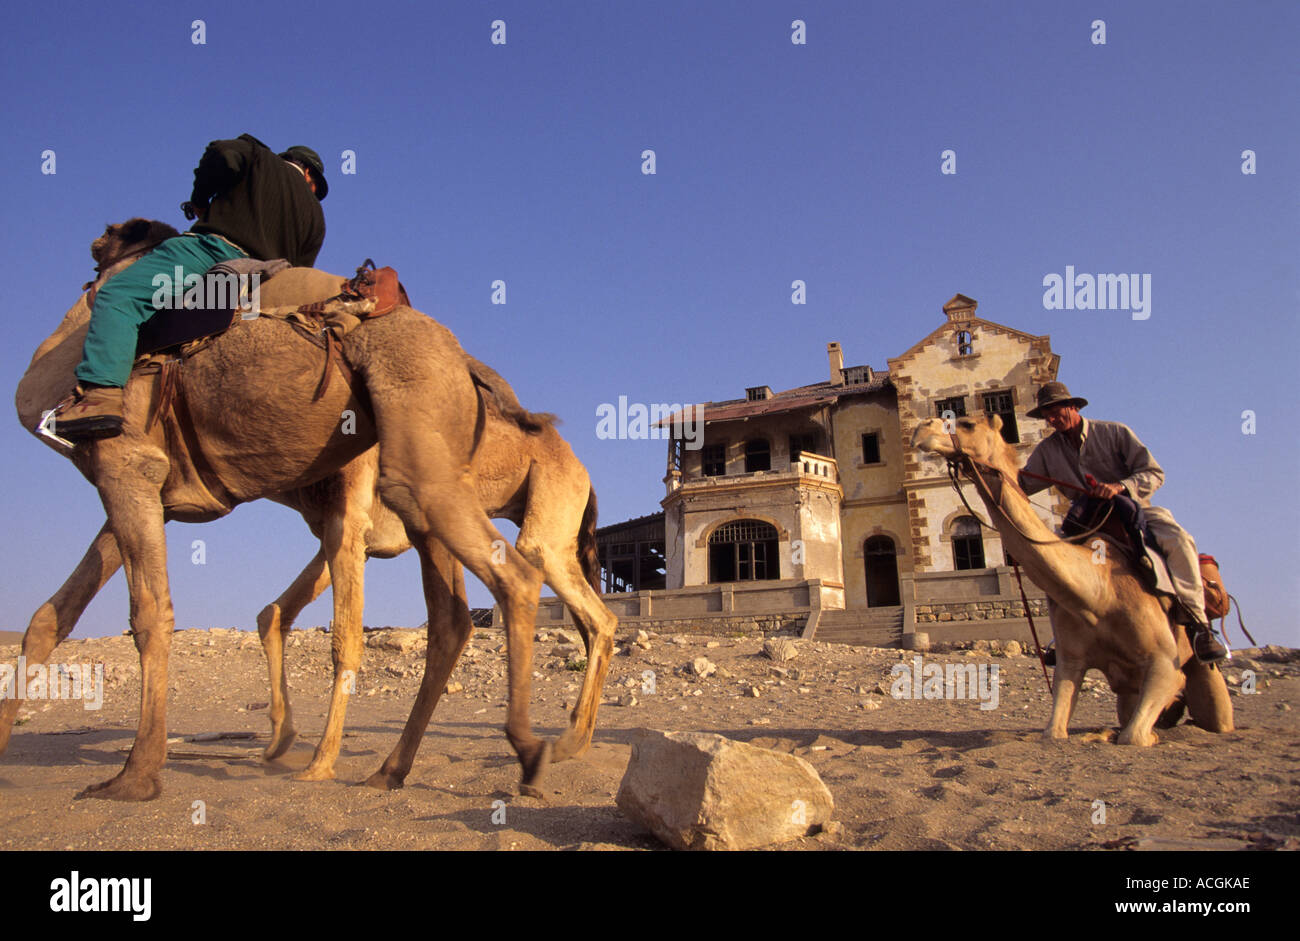 Benedict Allen his guide Tommy and team of camels at an abandoned Diamond mine Stock Photo